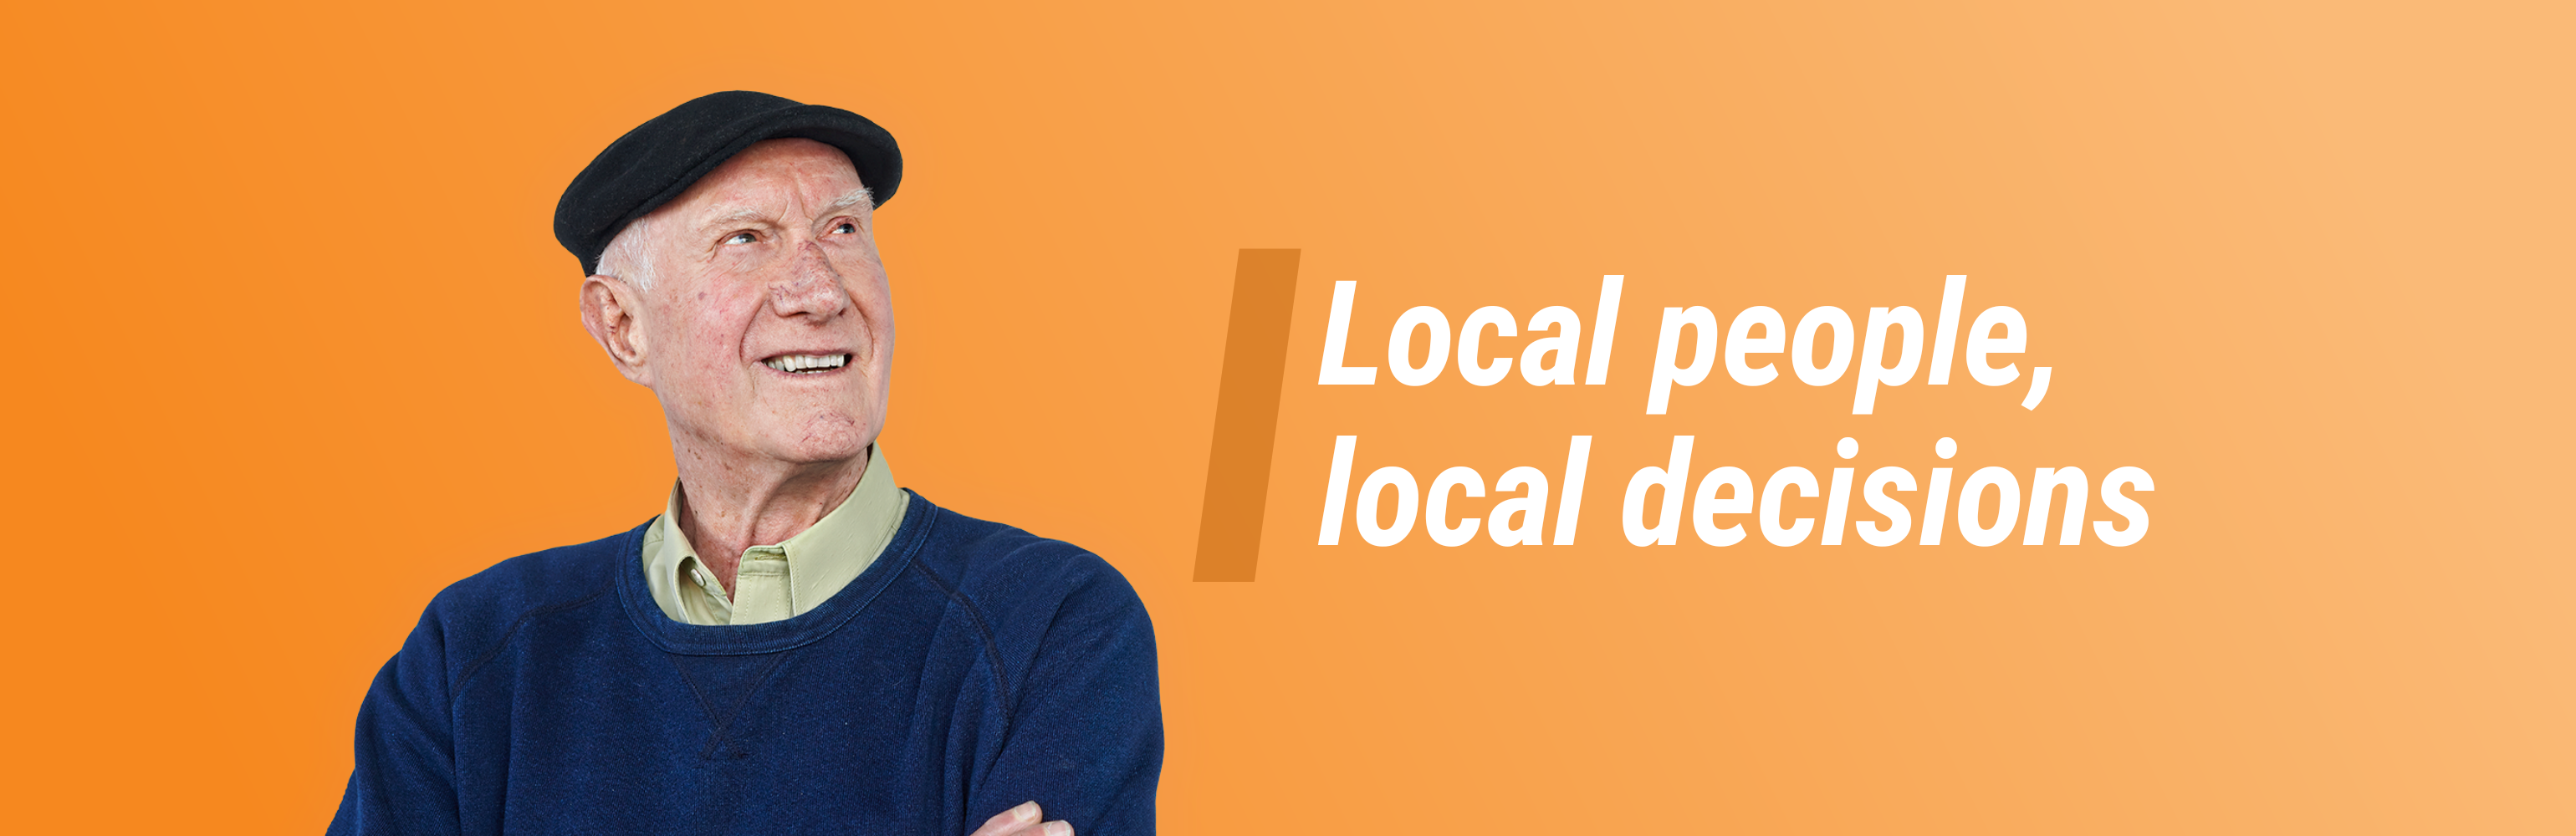 'Local people, local decisions'